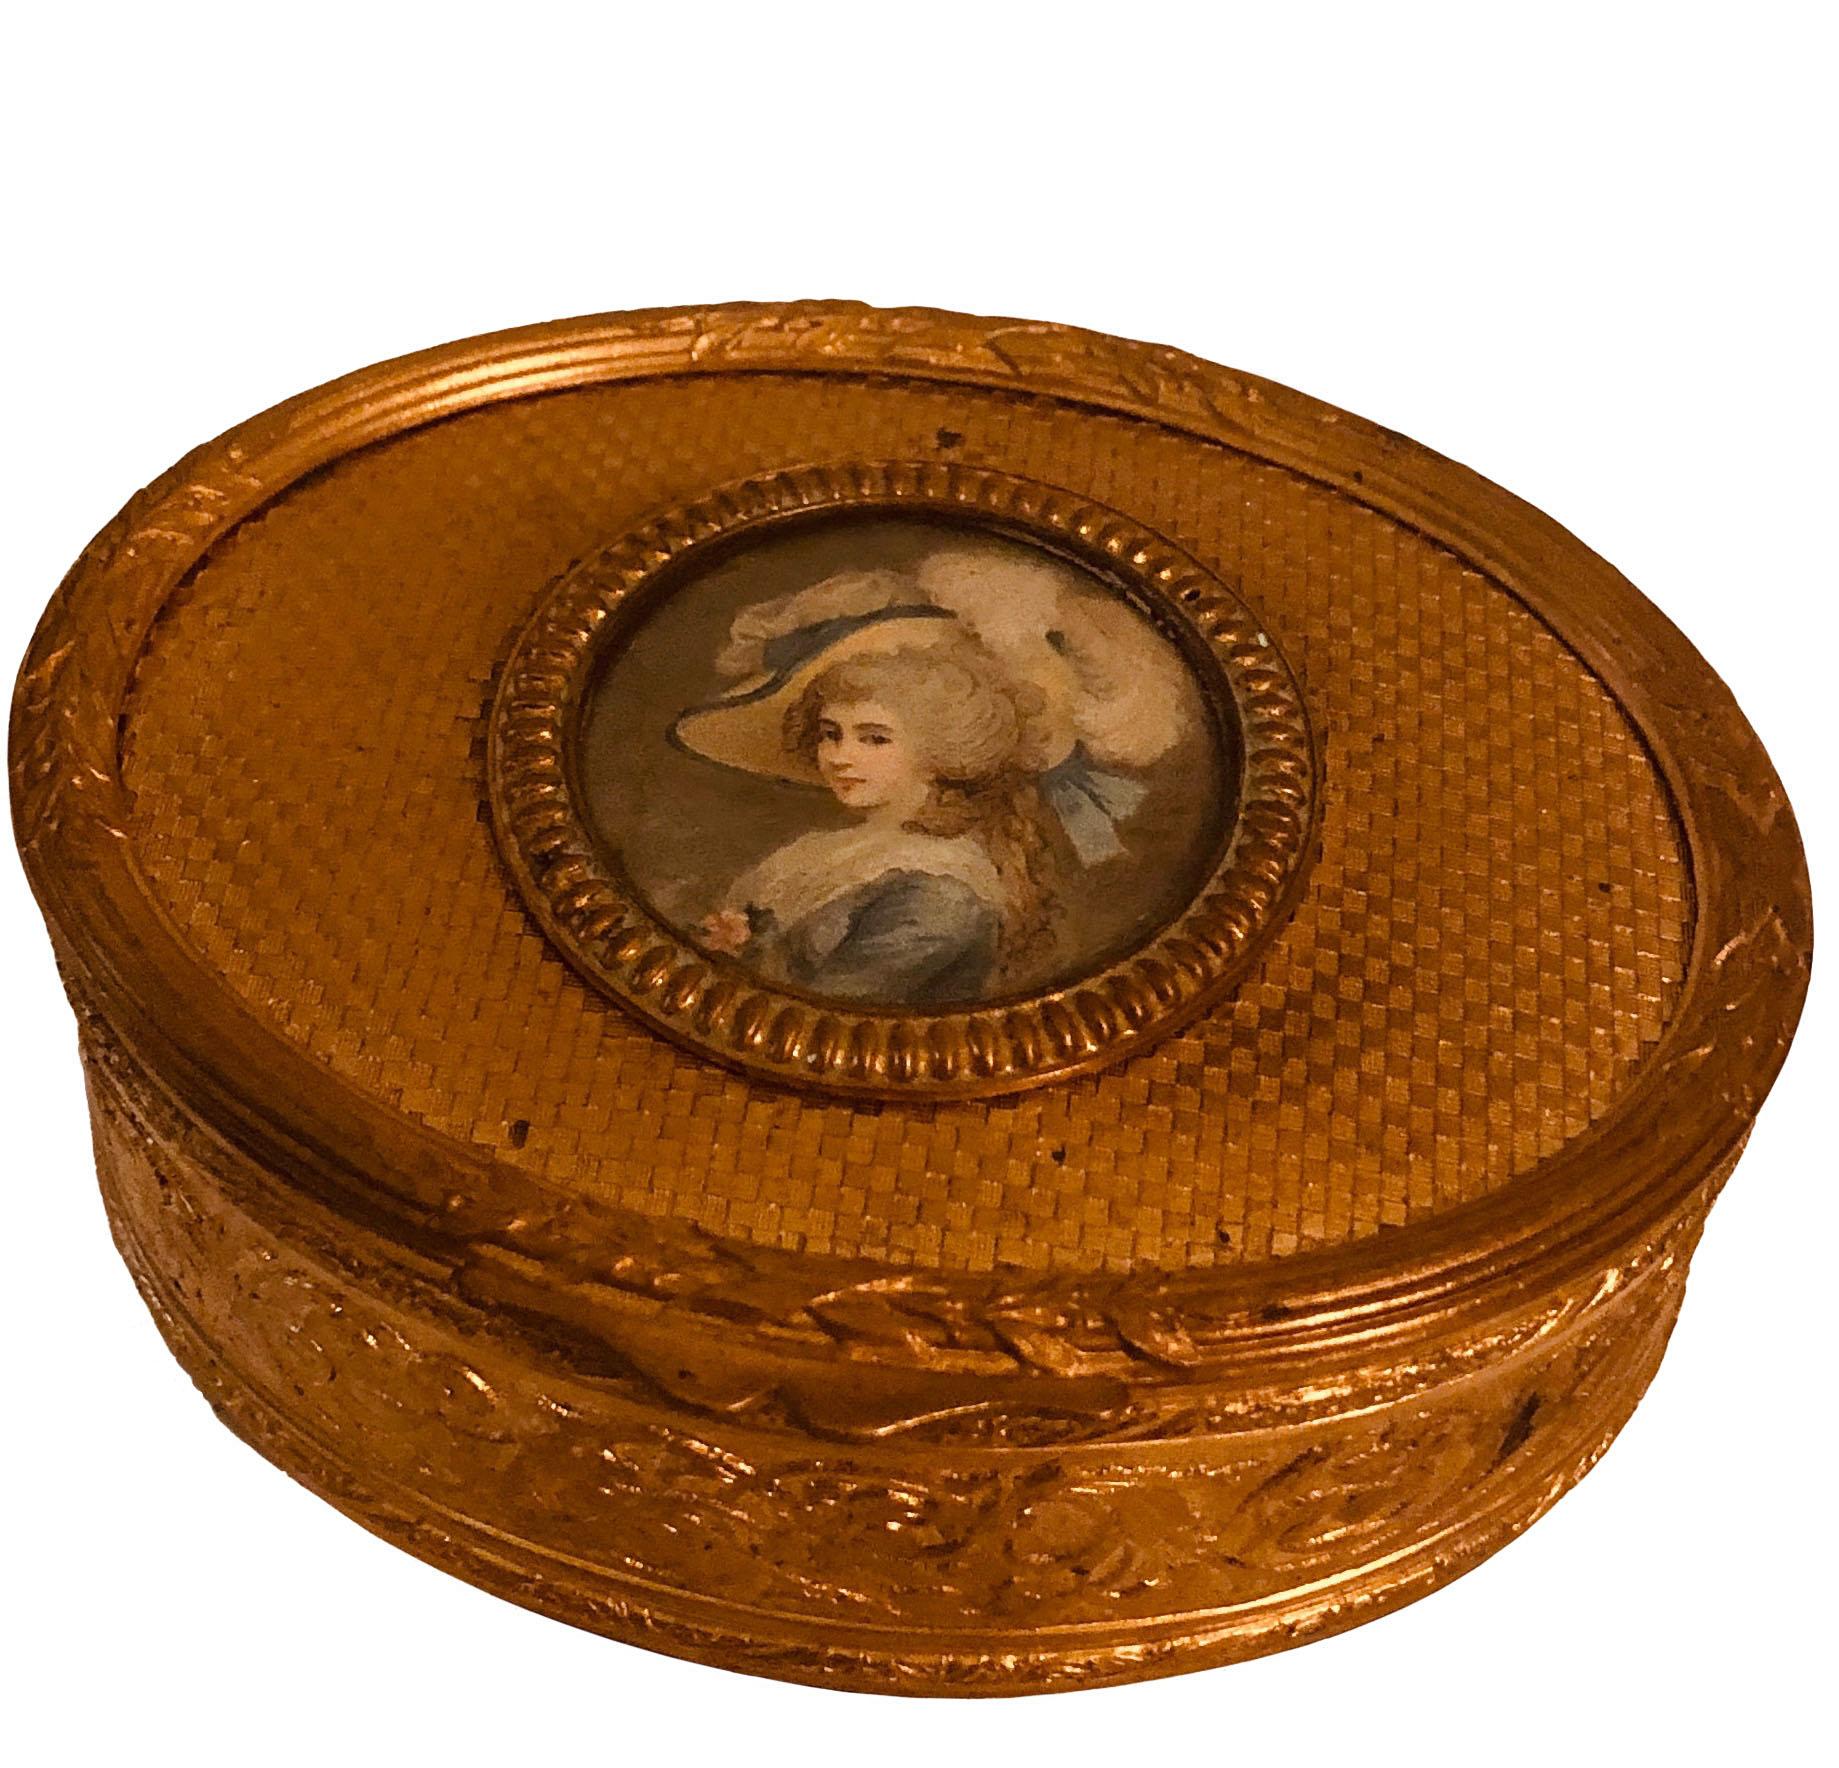 A strikingly beautiful French dore bronze box is all engraved with an ivory picture of an aristocrat, LeBron. The box is heavily chased with a velvet interior in red thats is original to the century. Circa 1890, France